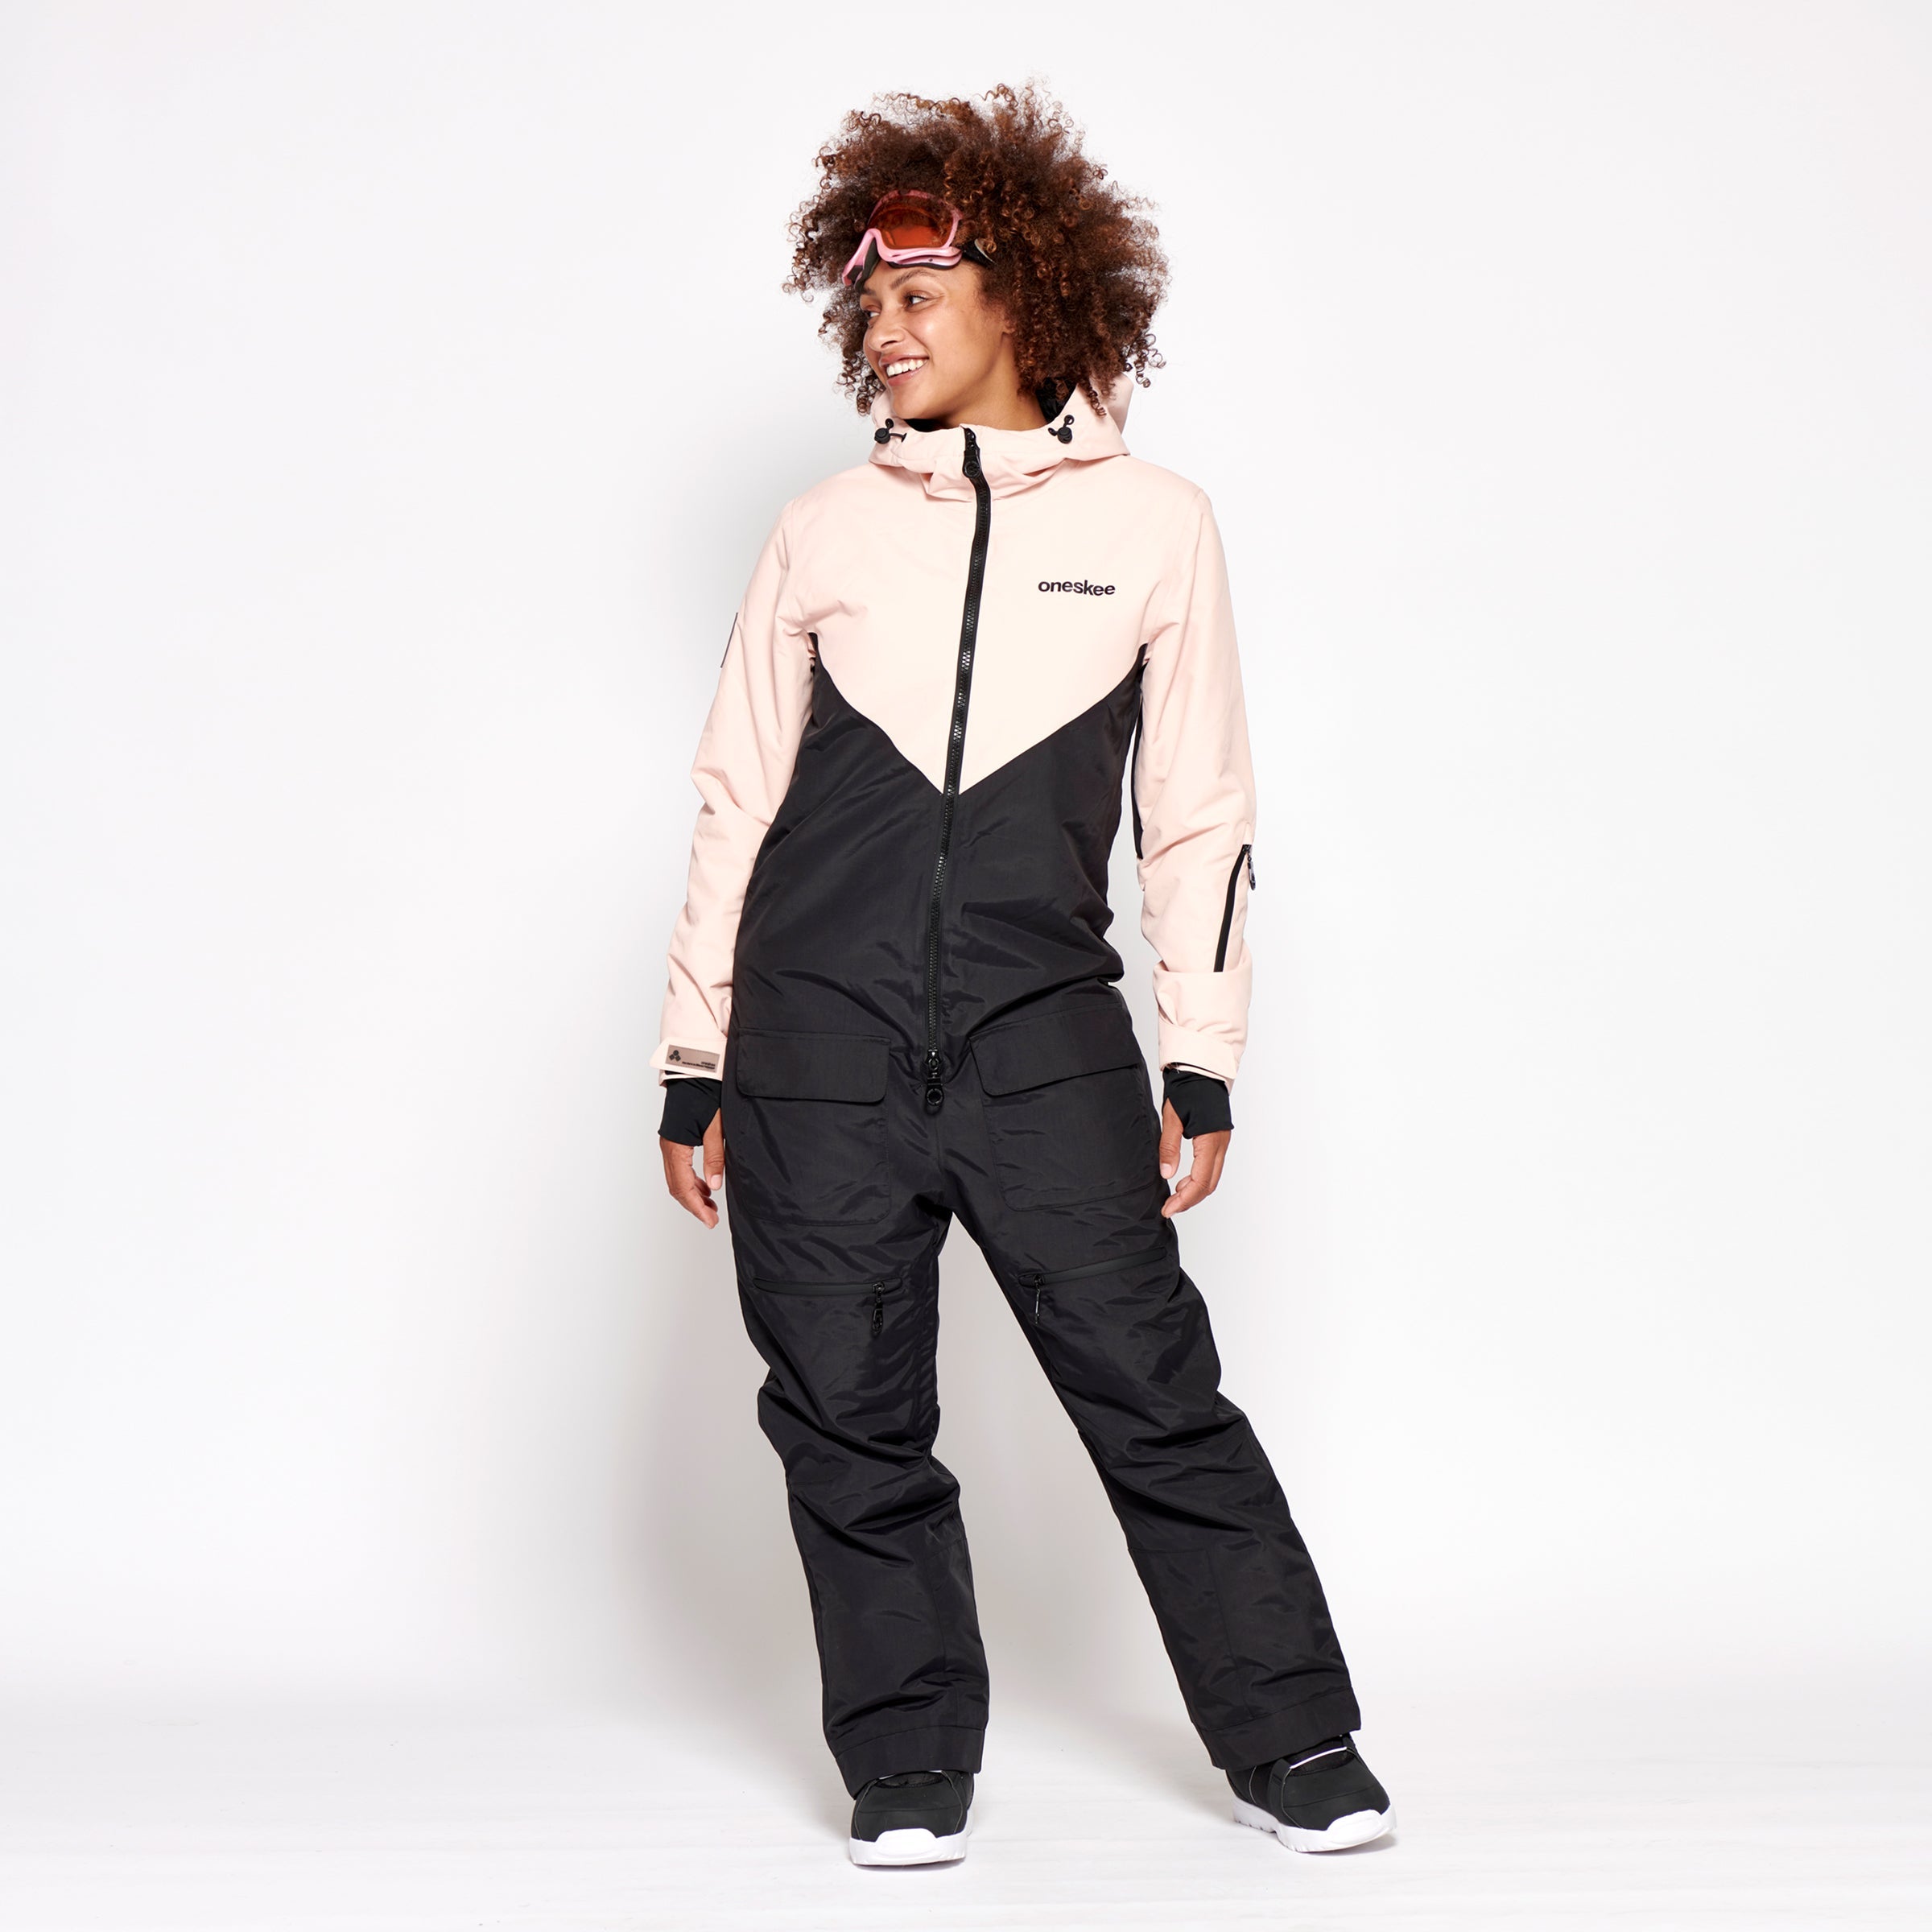 Women's Ski Suits - Dare to be Different - Oneskee EU